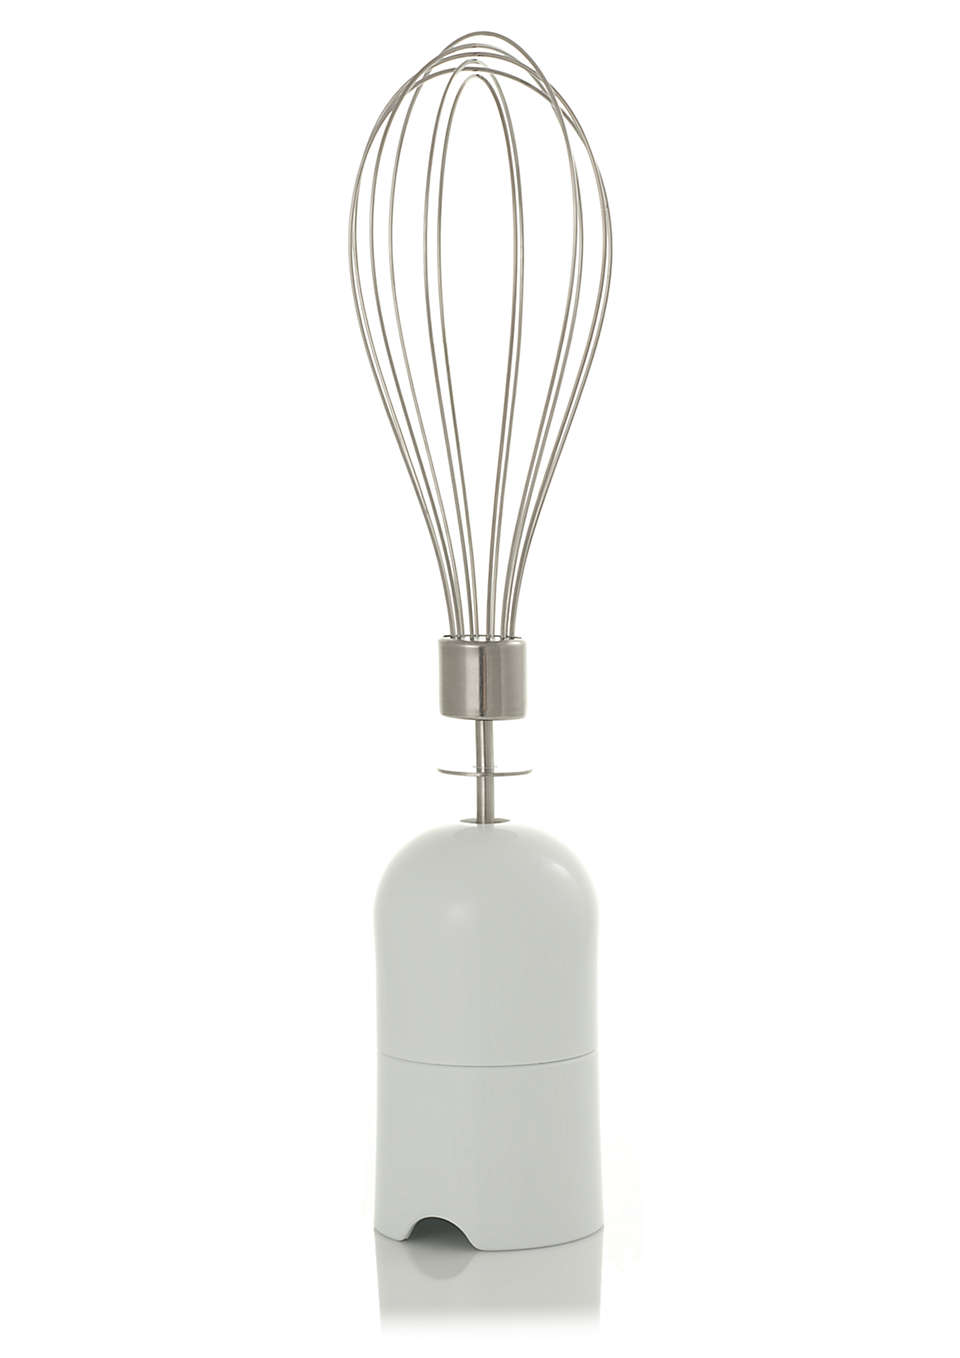 Additional tool for your hand blender